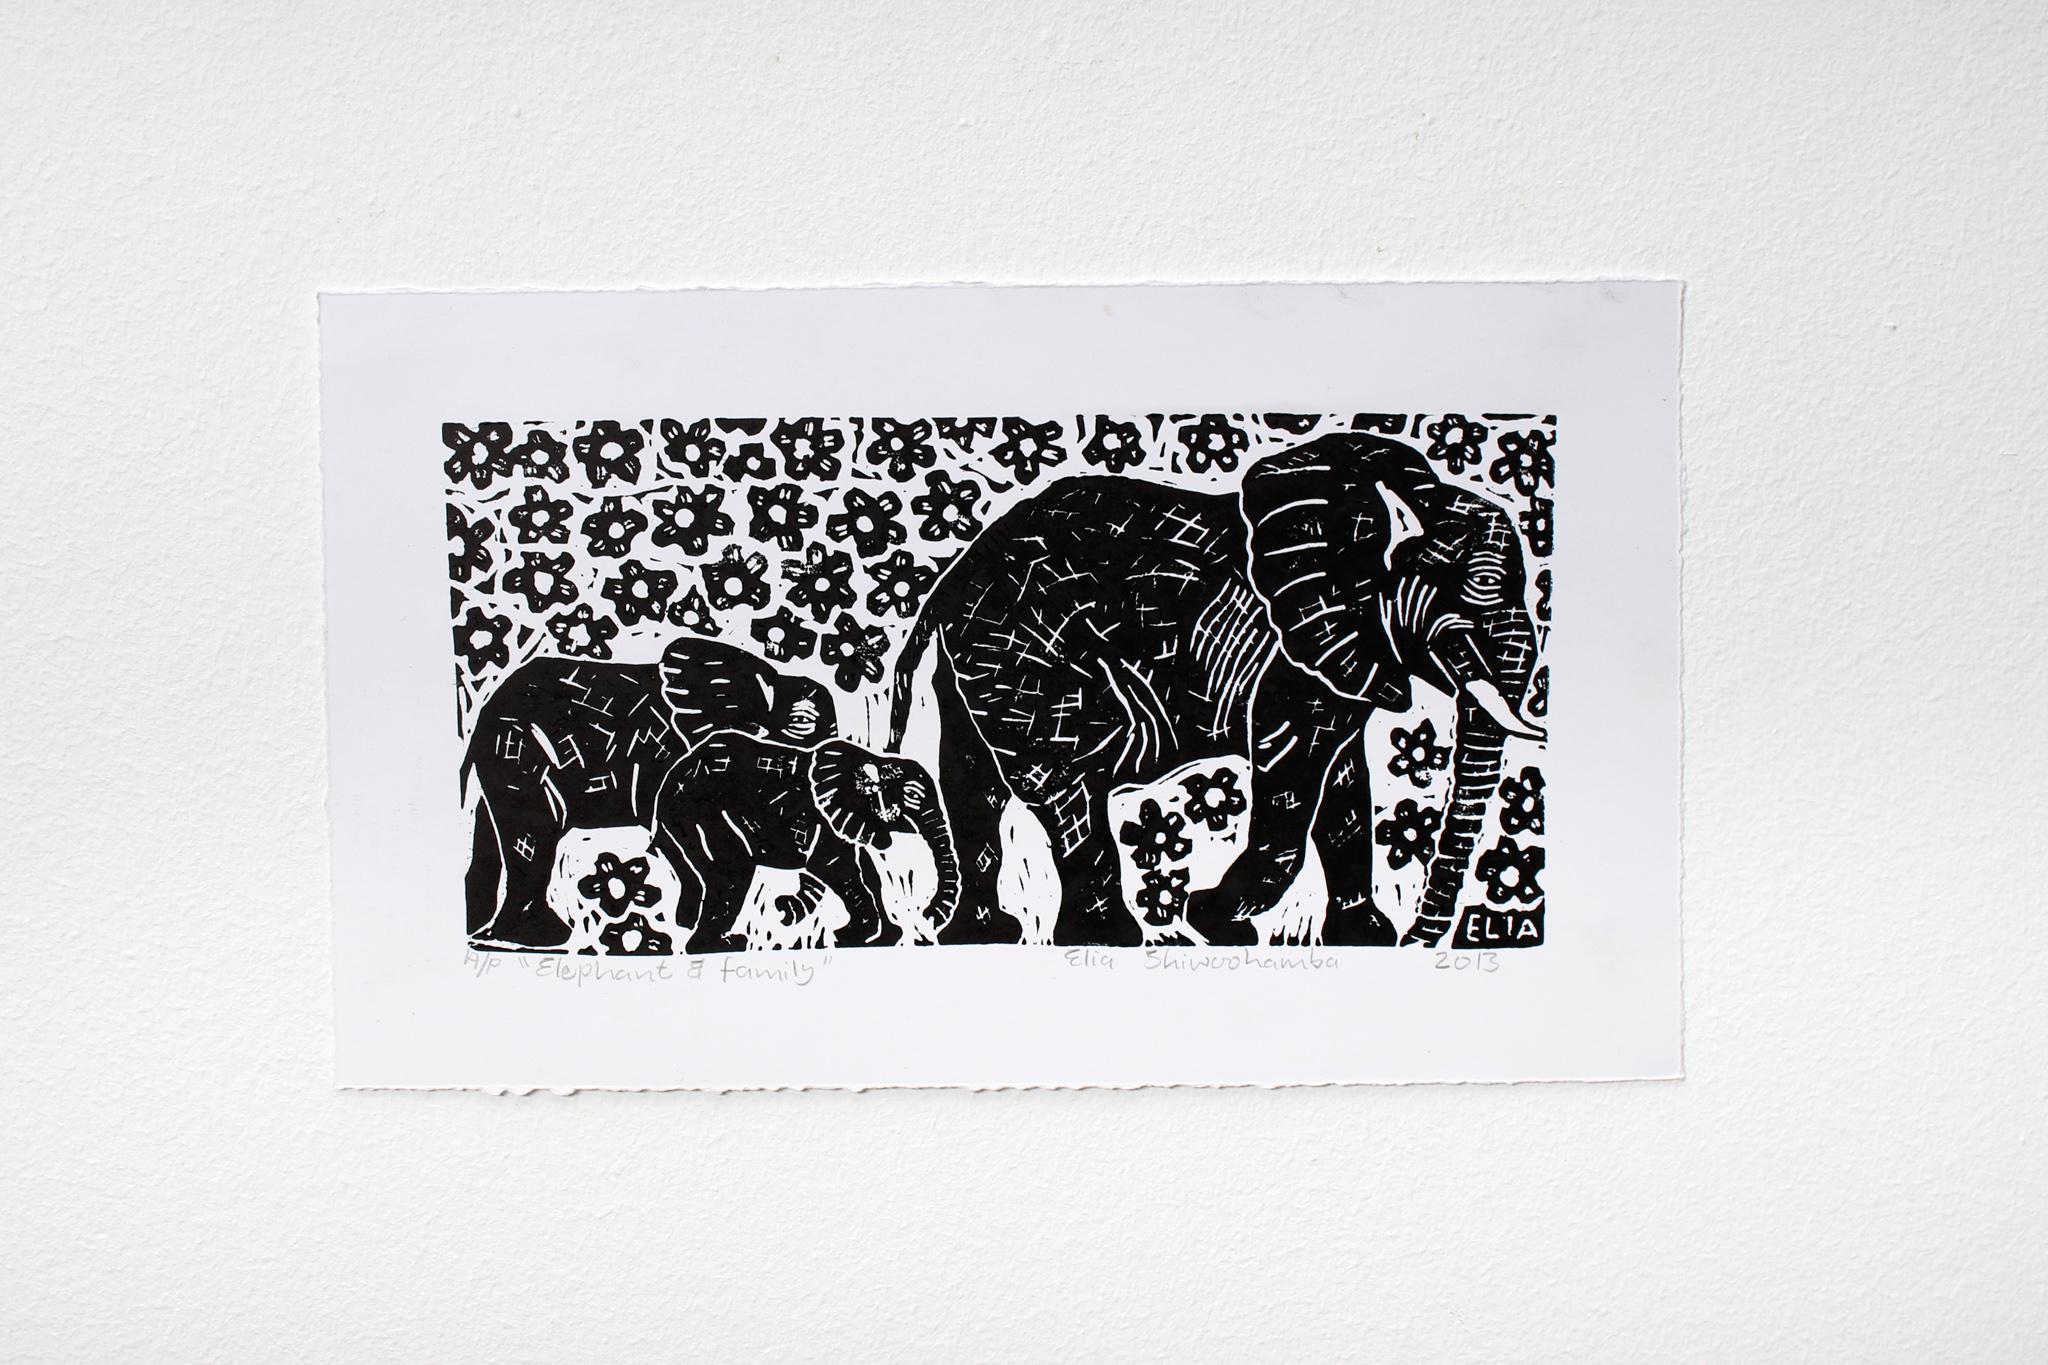 Elephant and family, Linoleum block prints on paper.

Elia Shiwoohamba was born in 1981 in Windhoek, Namibia. He graduated from the John Muafangejo Art Centre in Windhoek in 2006. Specialising in printmaking and sculpture, Shiwoohamba works as a